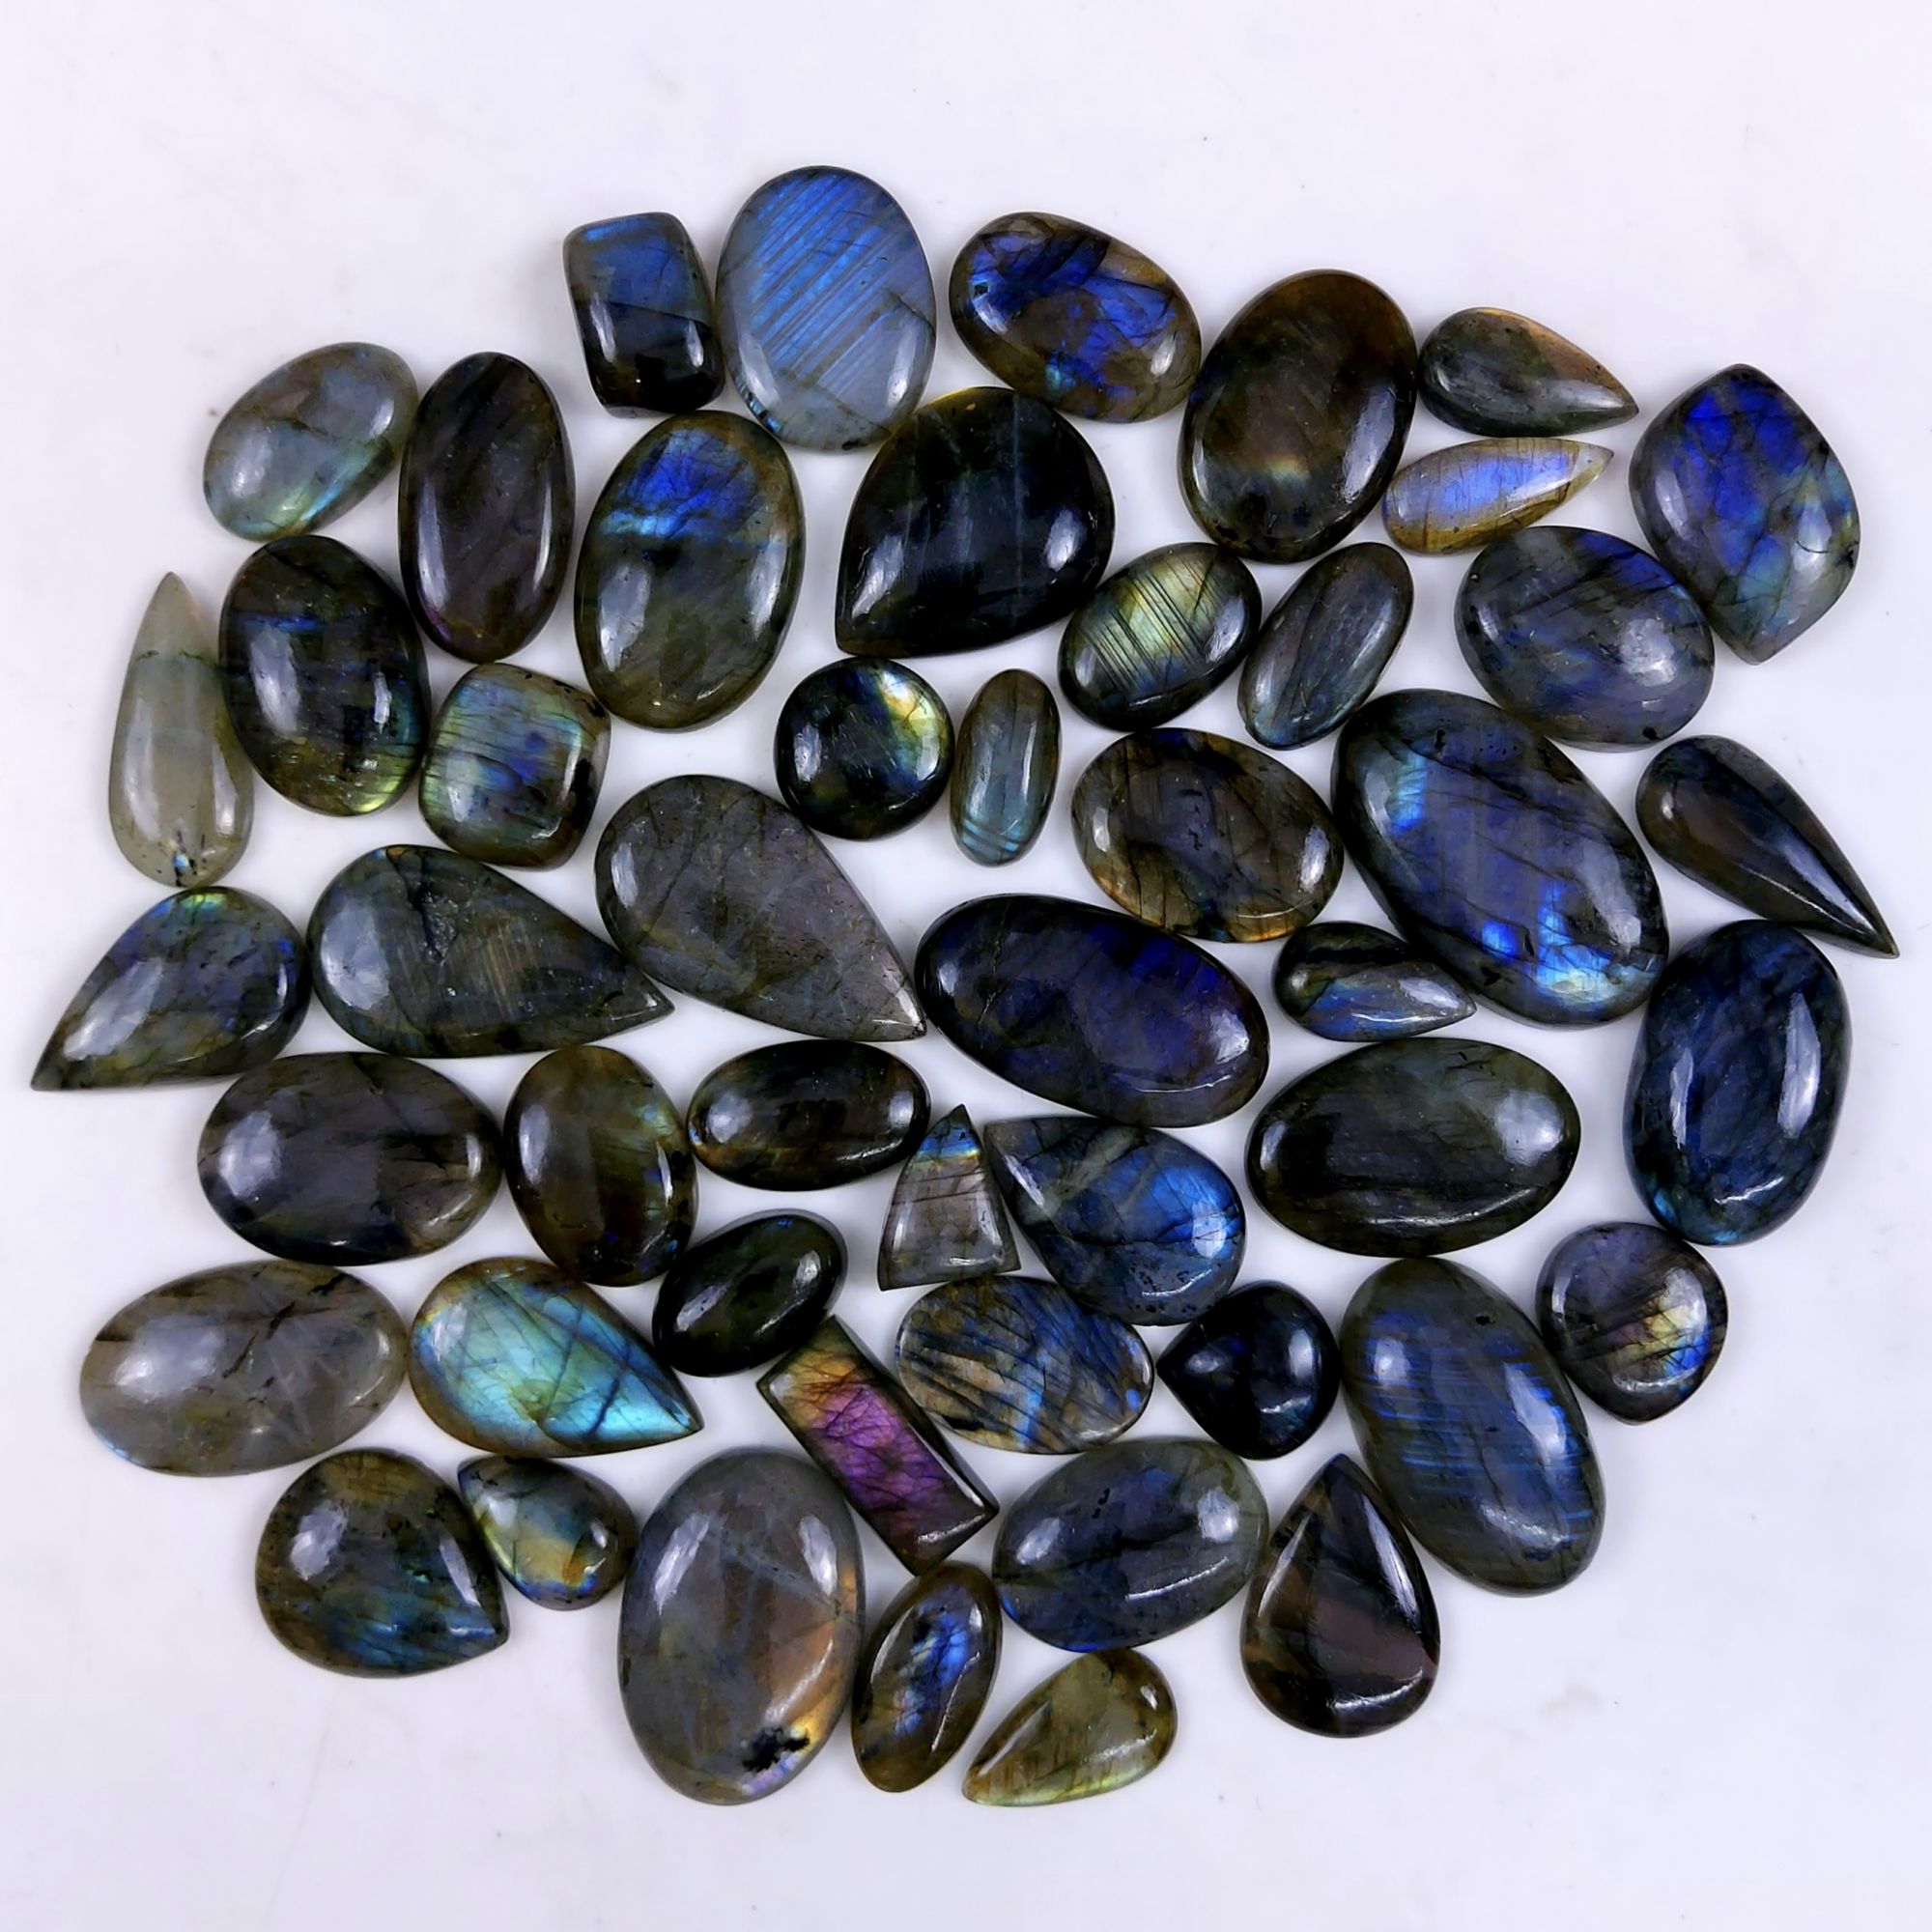 49pc 1529Cts Labradorite Cabochon Multifire Healing Crystal For Jewelry Supplies, Labradorite Necklace Handmade Wire Wrapped Gemstone Pendant 42x26 17x17mm#6397